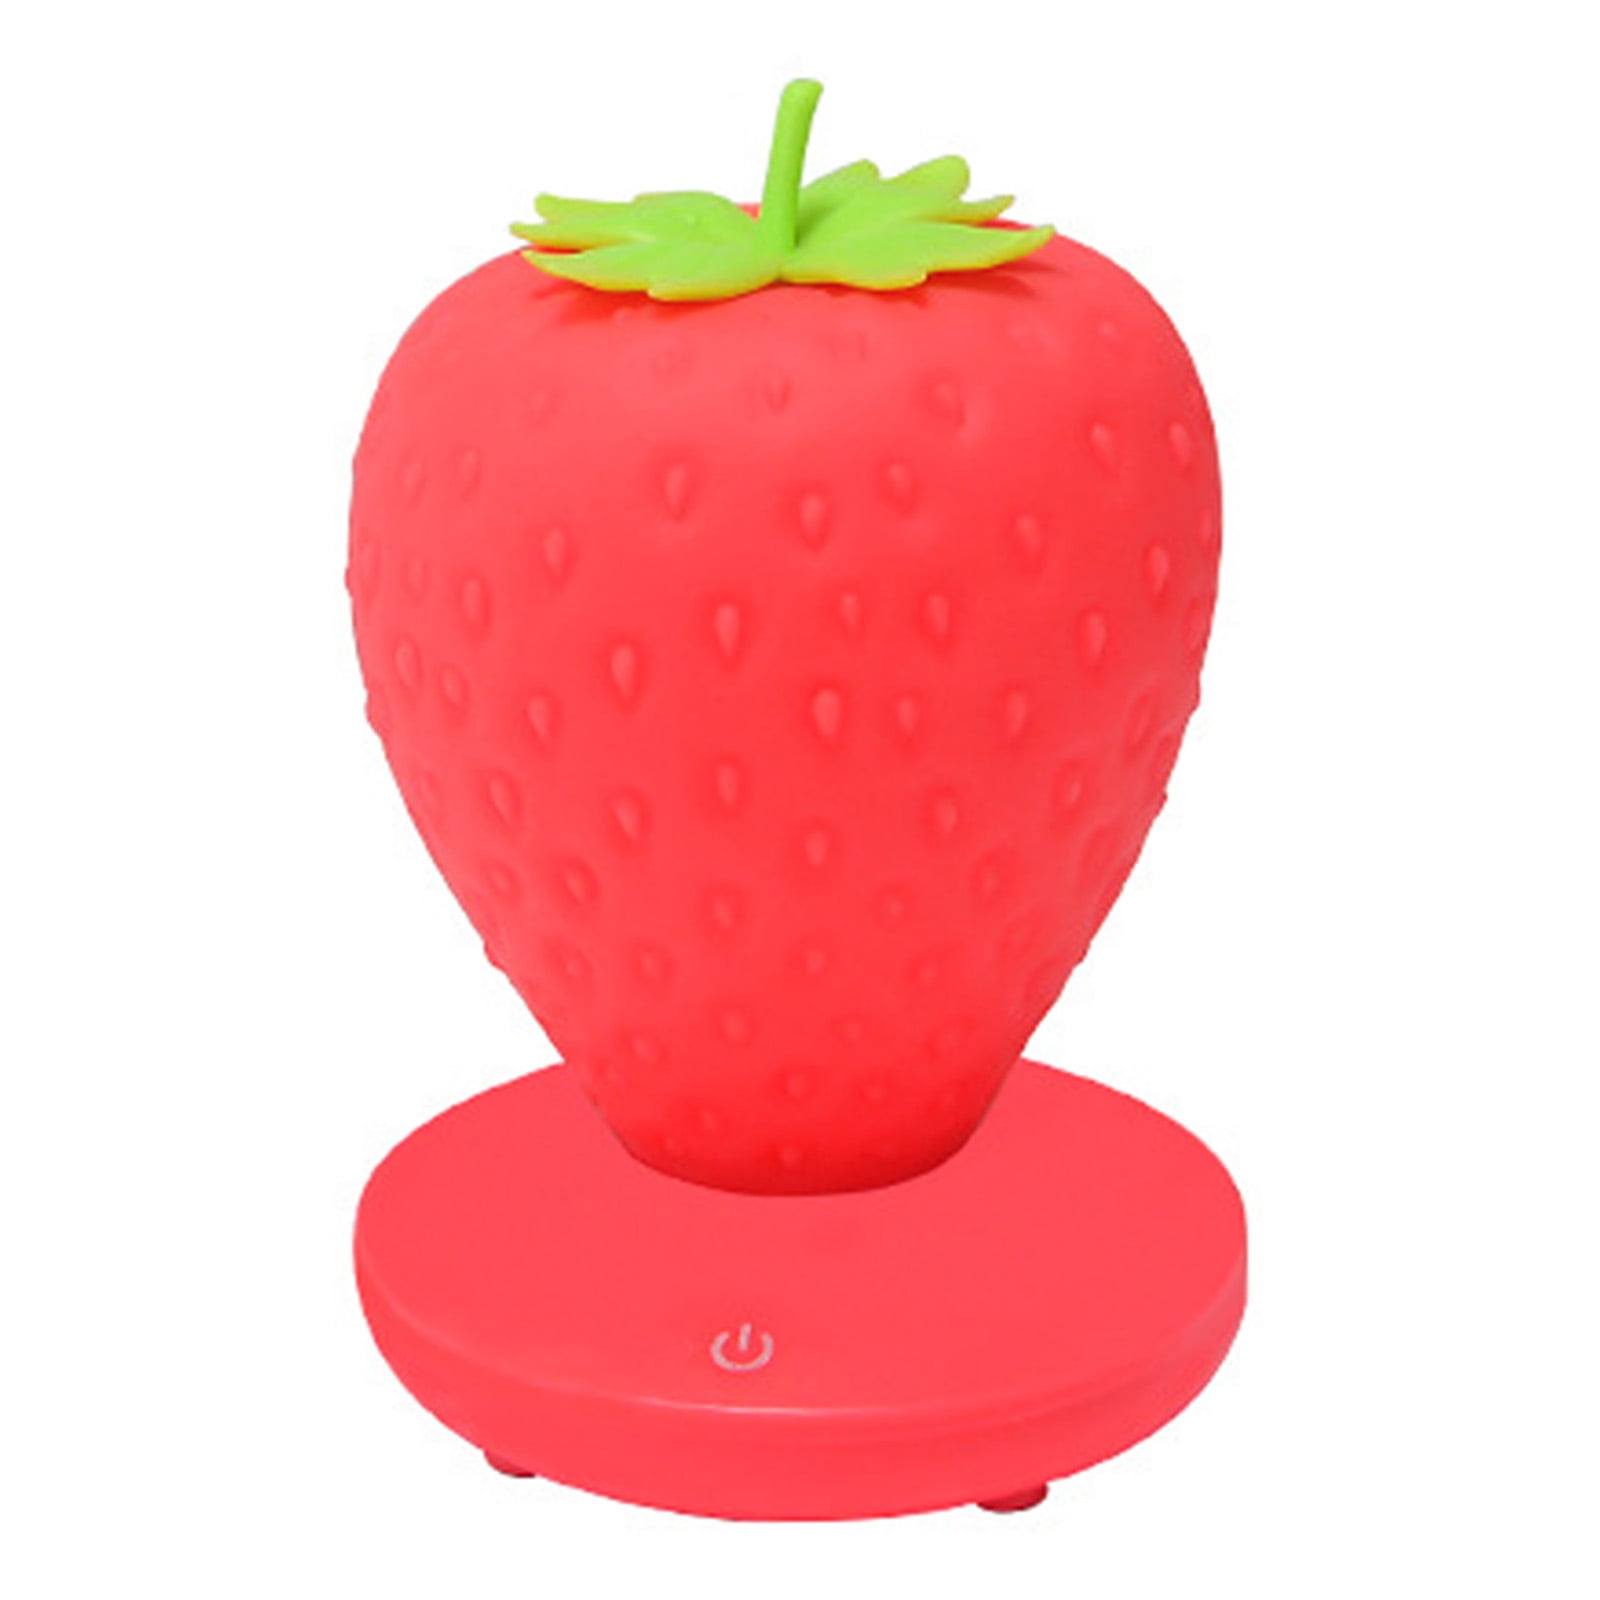 Strawberry Lamp LED Atmosphere Bedside Reading Night Light USB Rechargeable Hot 